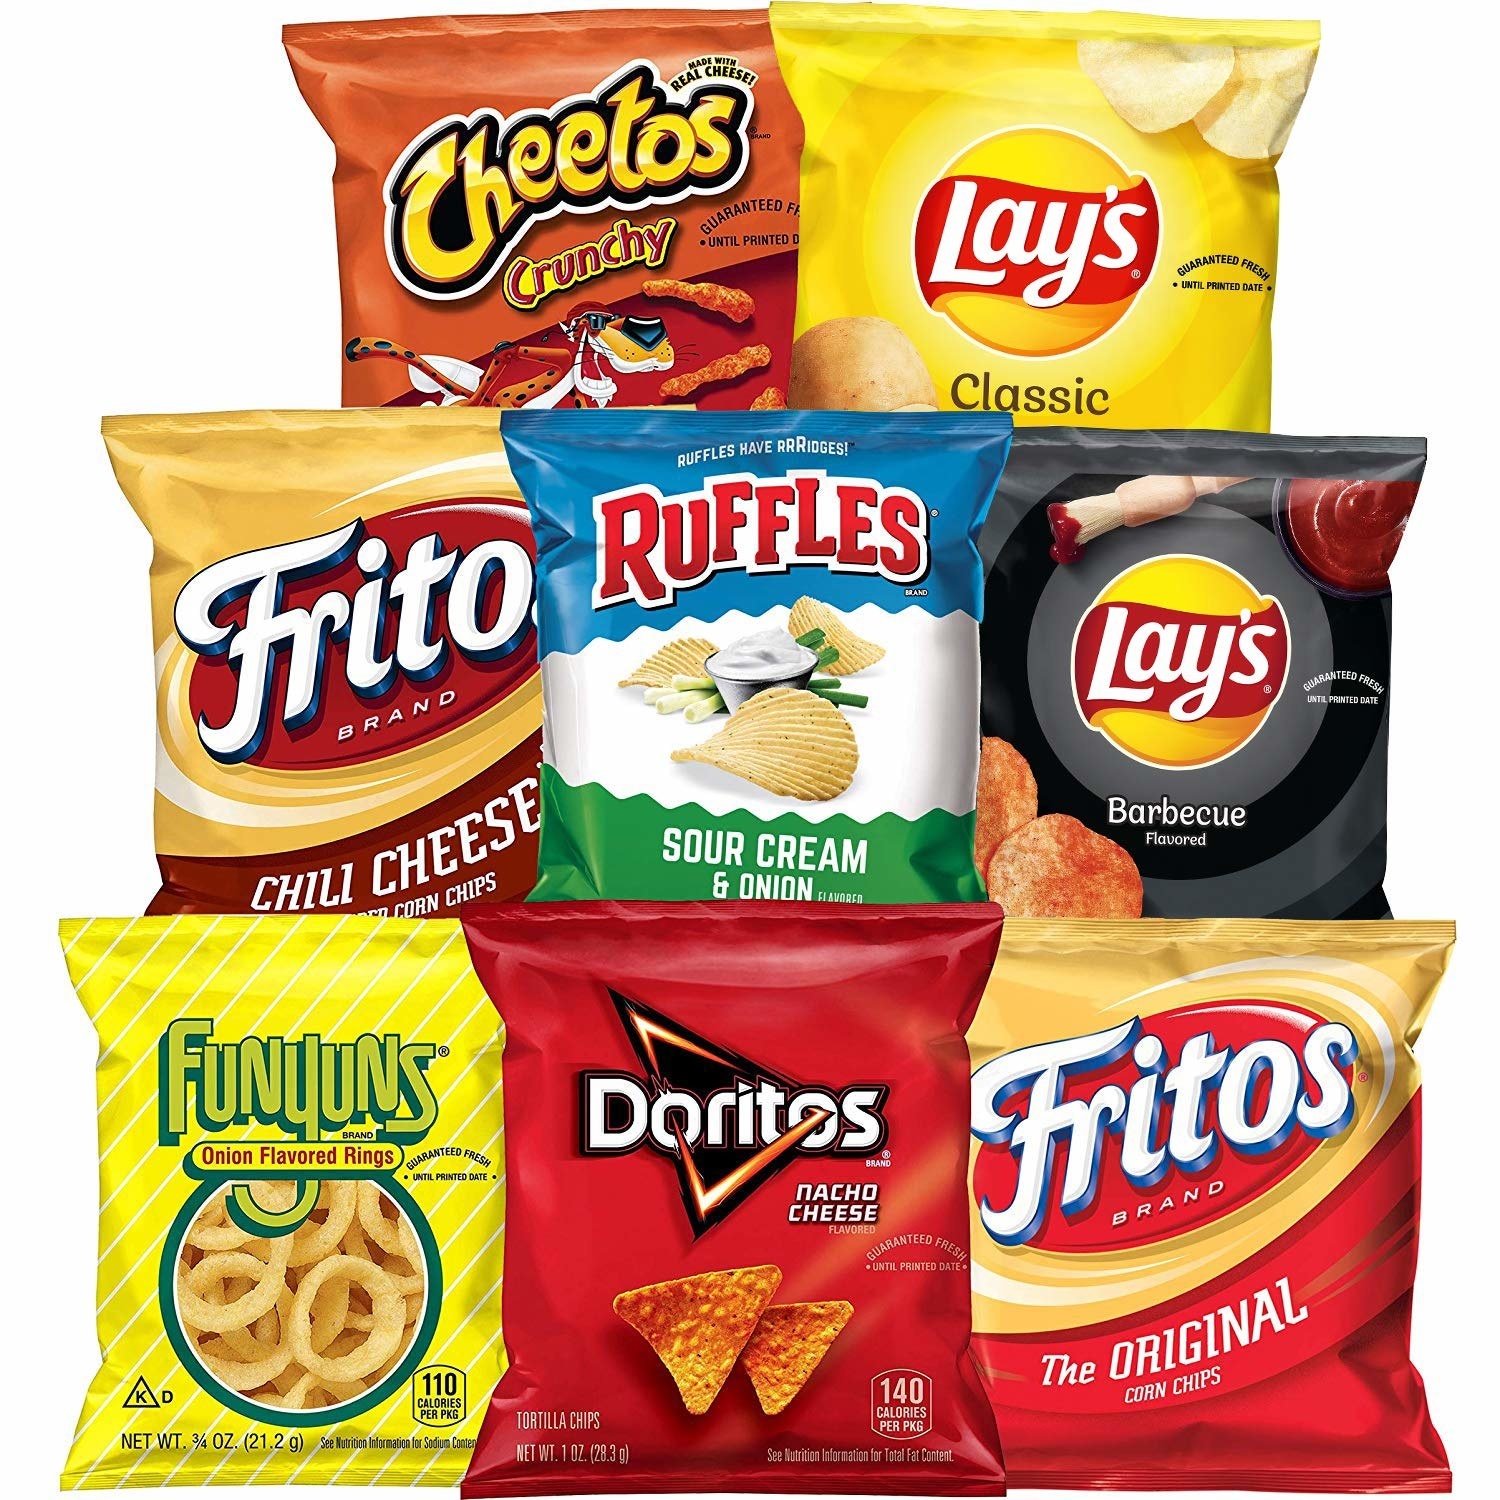 the bags of chips